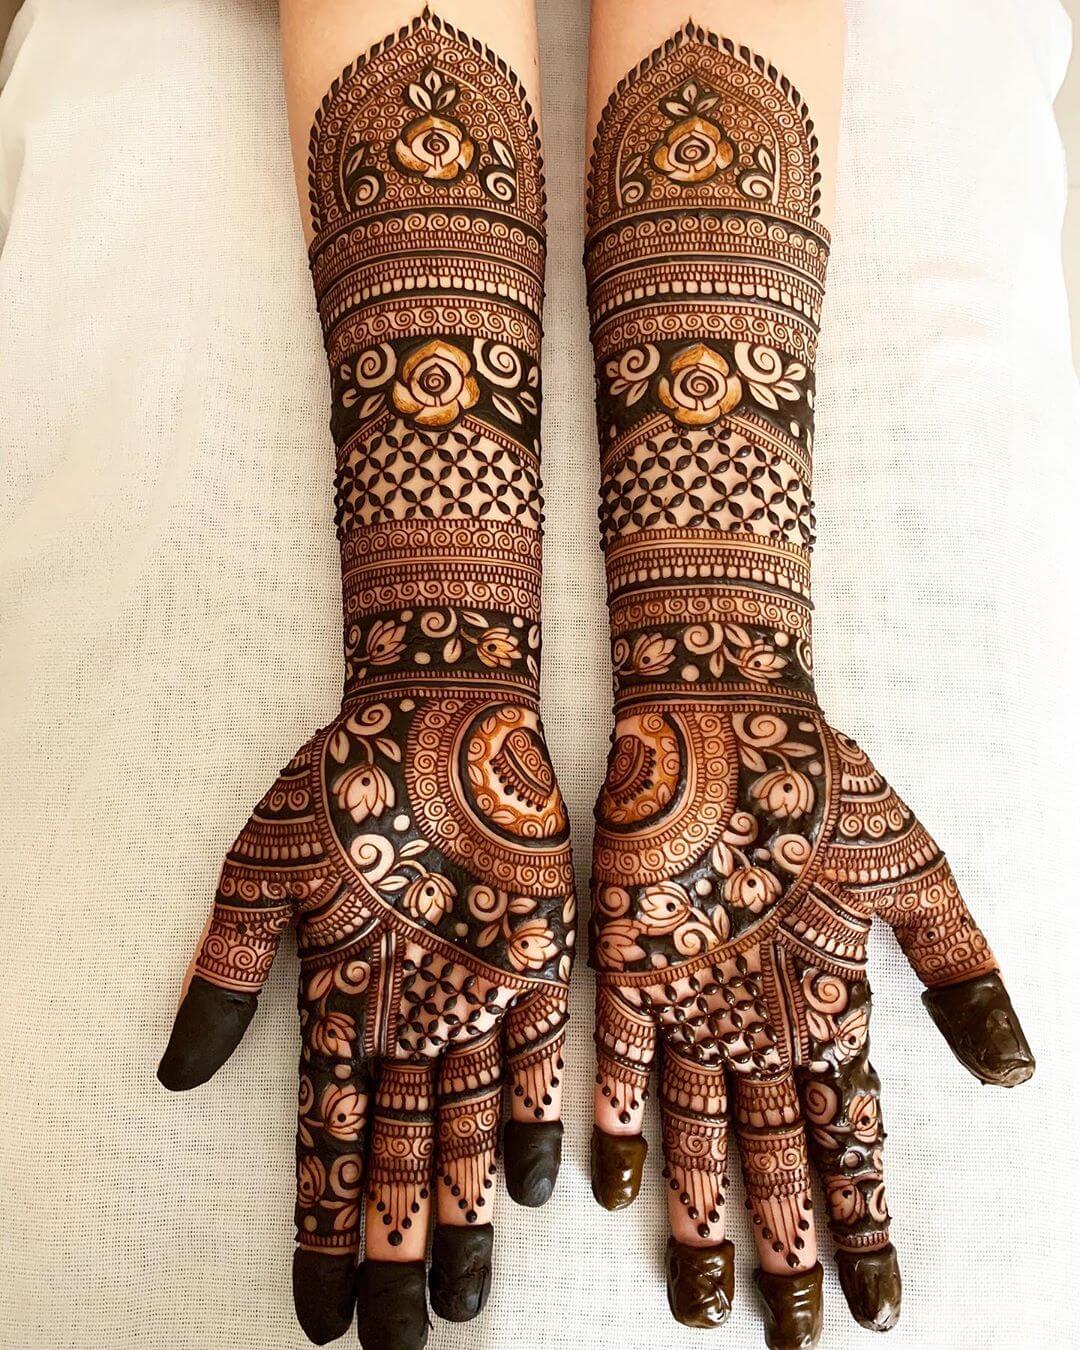 31 Stylish Full Hand Mehndi Design You'll Fall In Love With